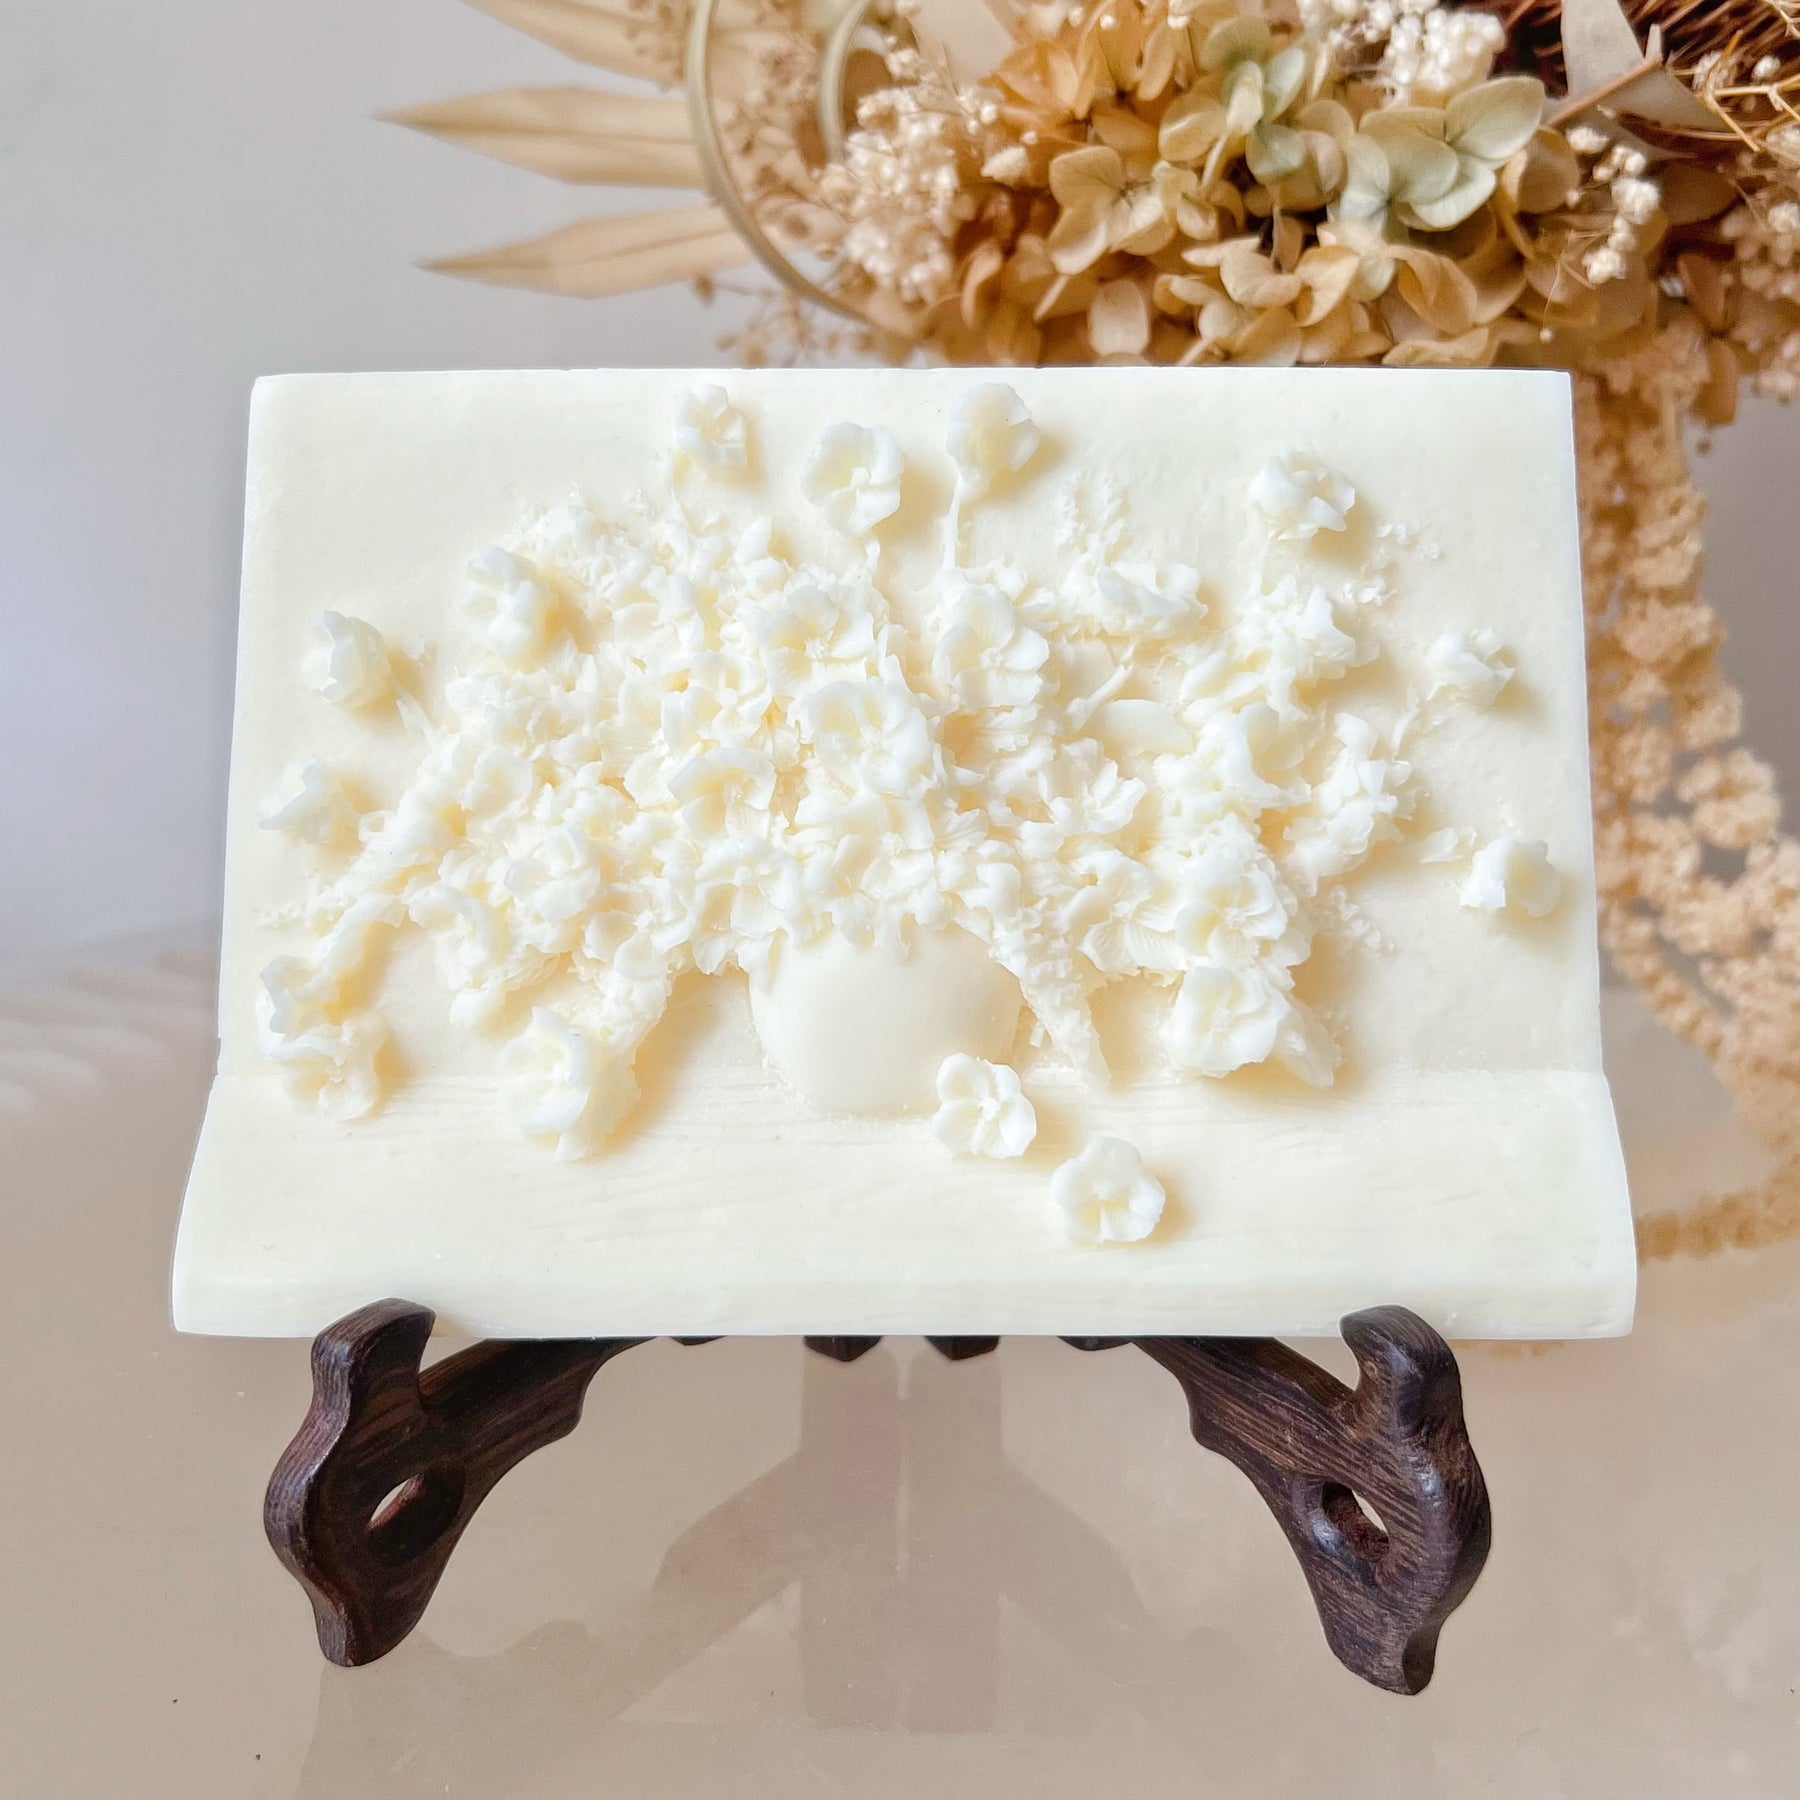 Flower Bouquet Scented Soy Wax Tablet, Home Décor - LMJ Candles